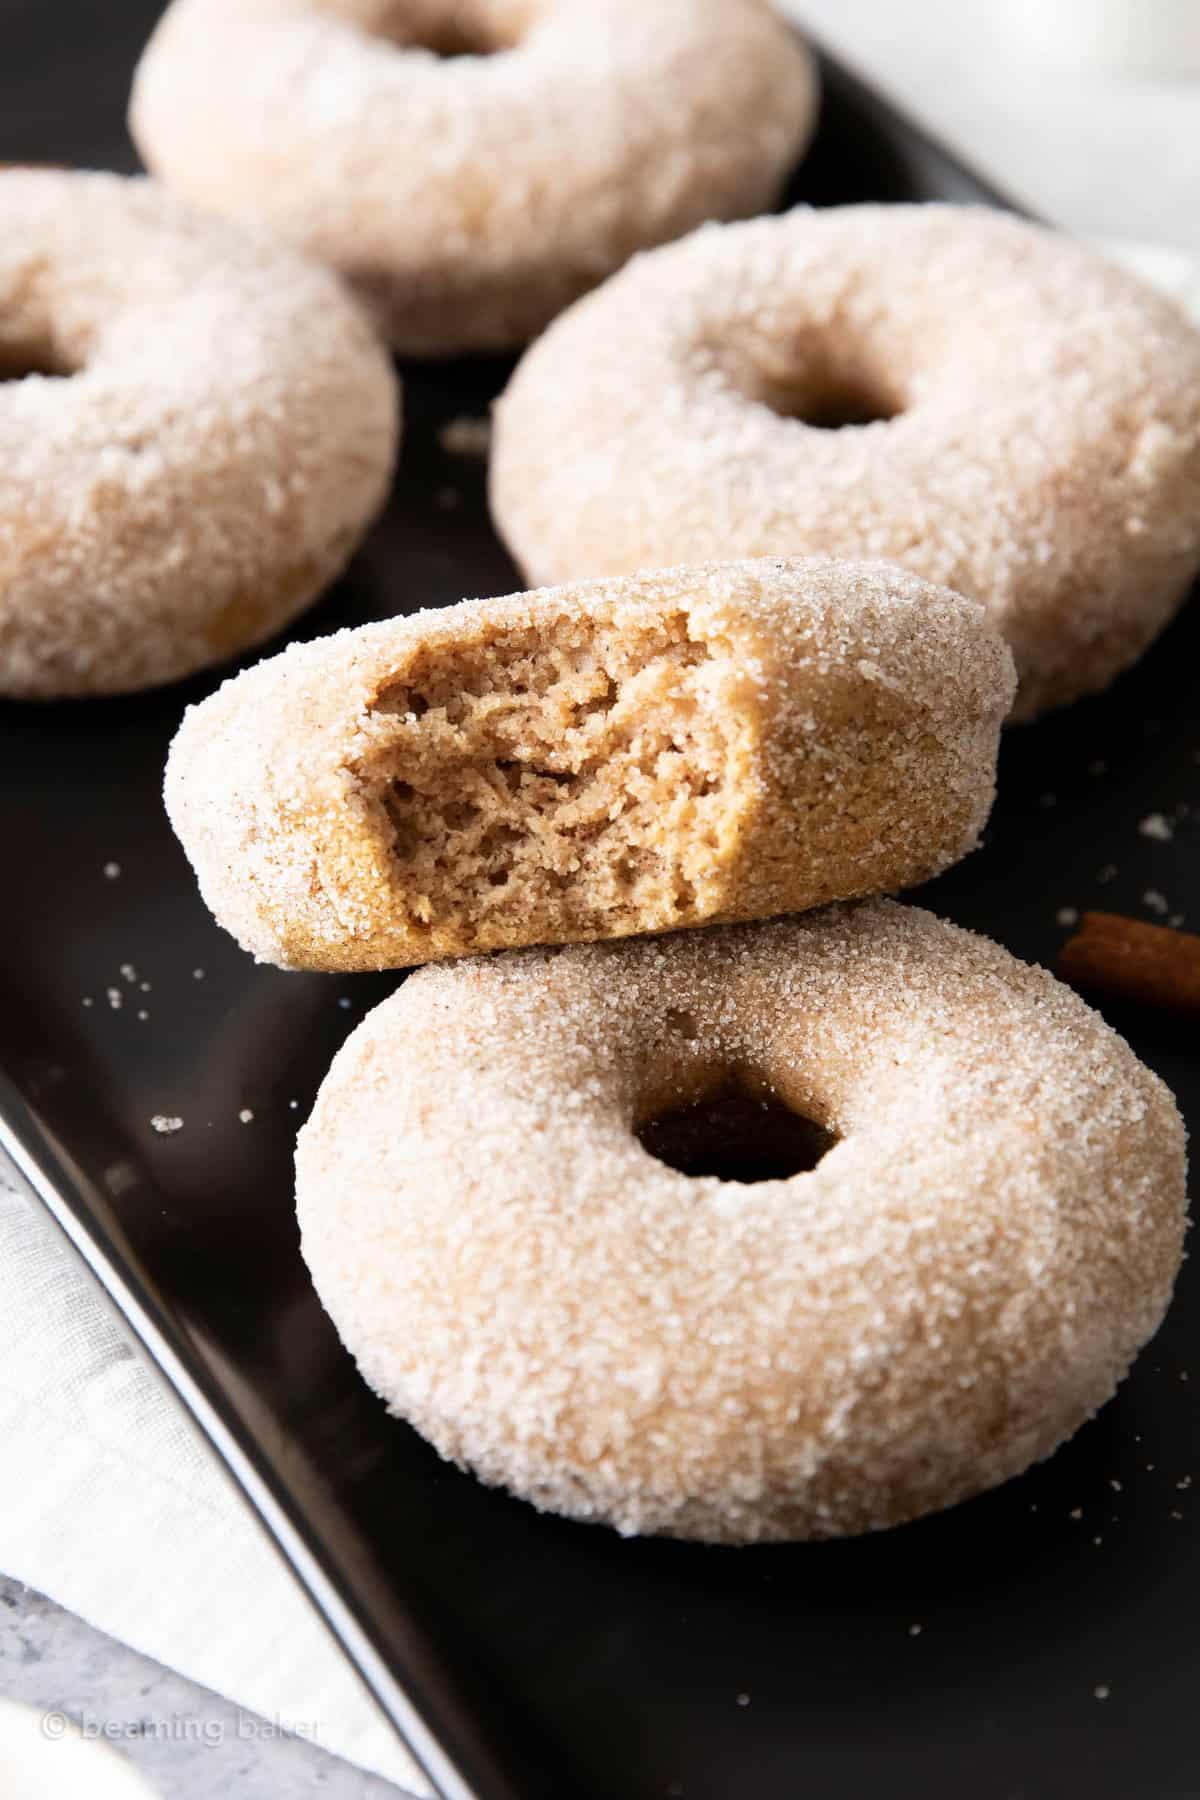 One bitten cinnamon sugar donut perched on top of another